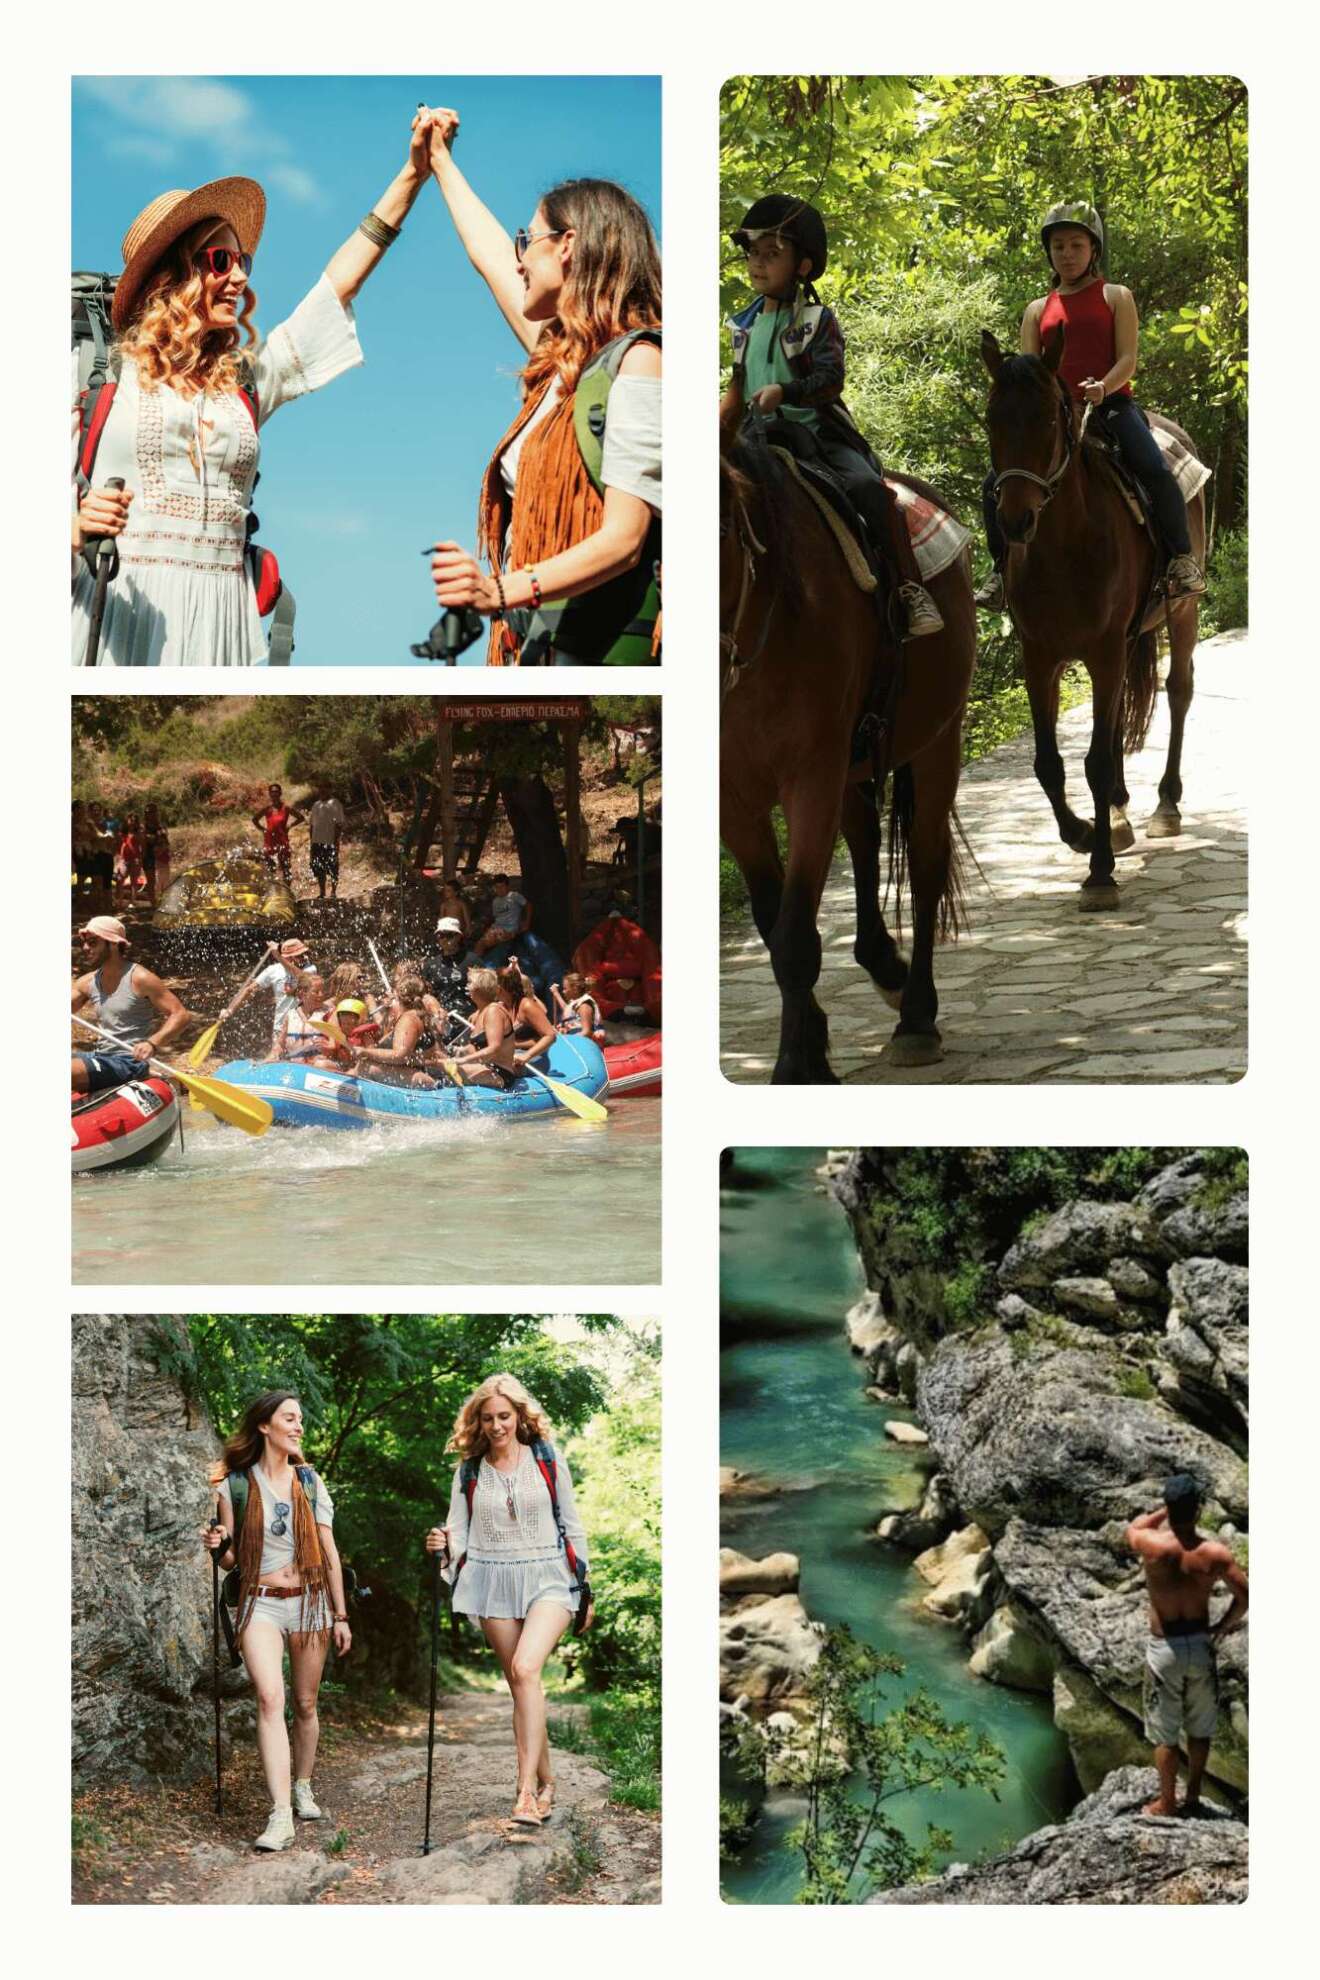 A collage of outdoor adventure images: Top left shows two female hikers high-fiving, top right features two people riding horses, bottom left displays people white-water rafting, and bottom right includes two images, one of women trekking and another of a person standing on a cliff overlooking a river.